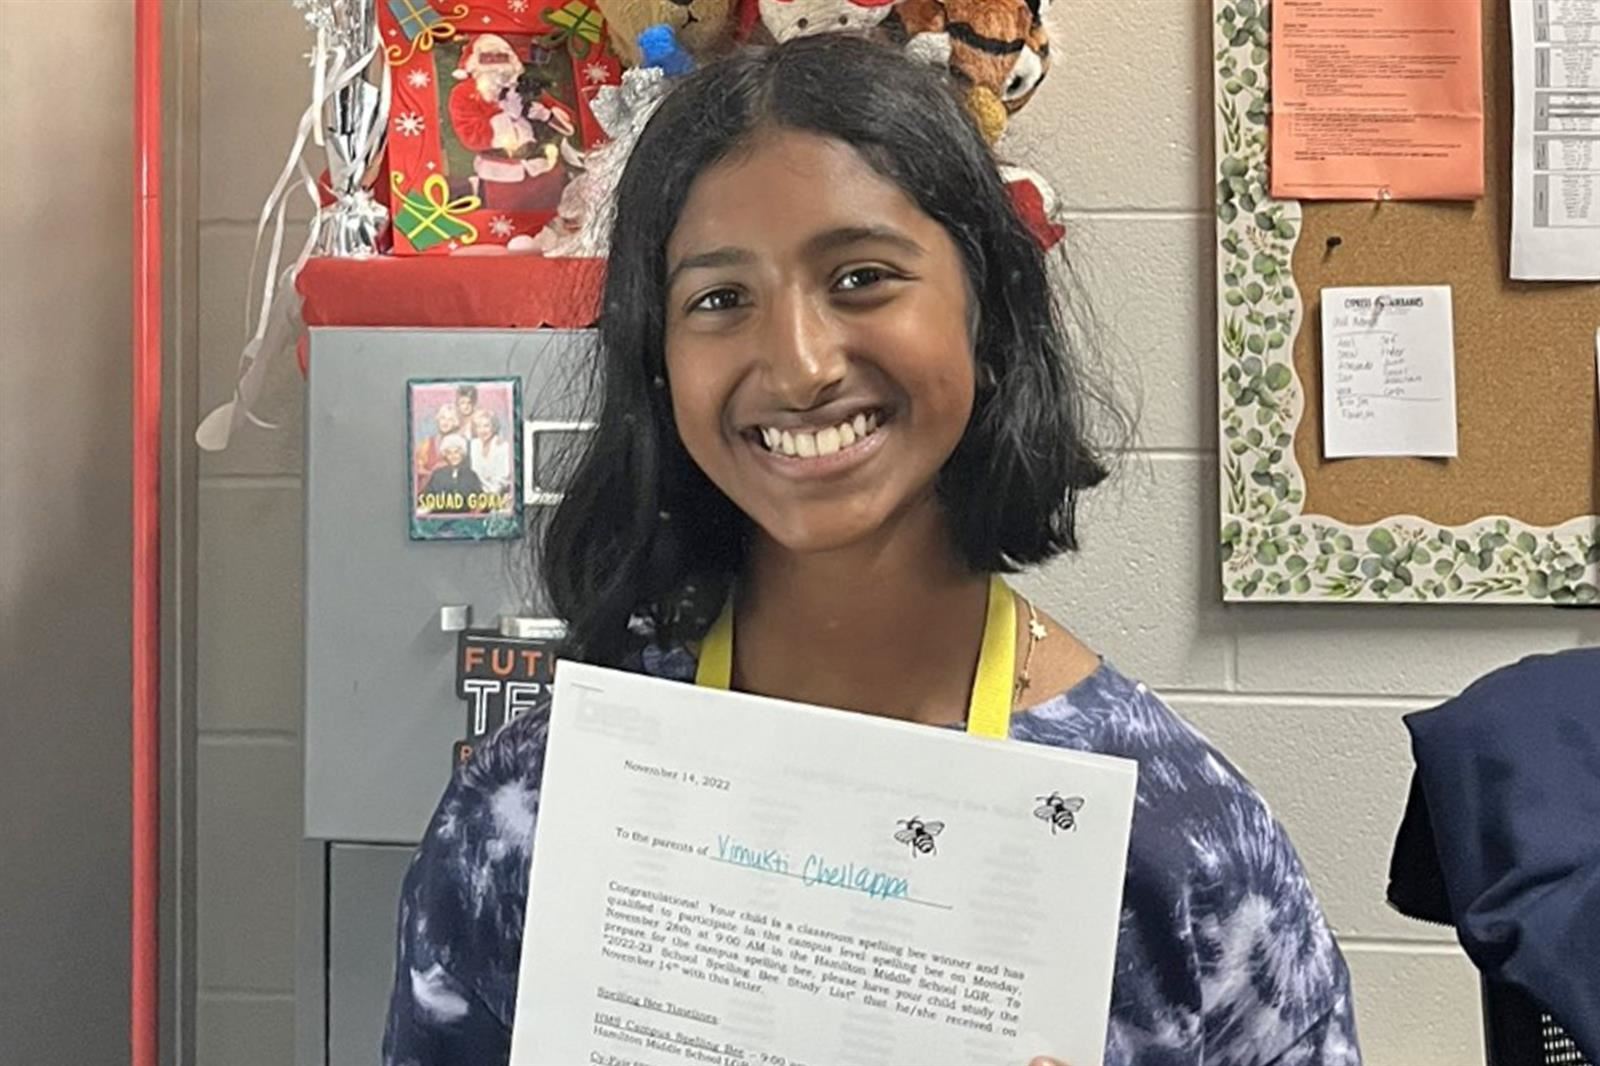  Hamilton Middle School sixth grade student Vimukti Chellappa, who is a 2022 Difference Maker.